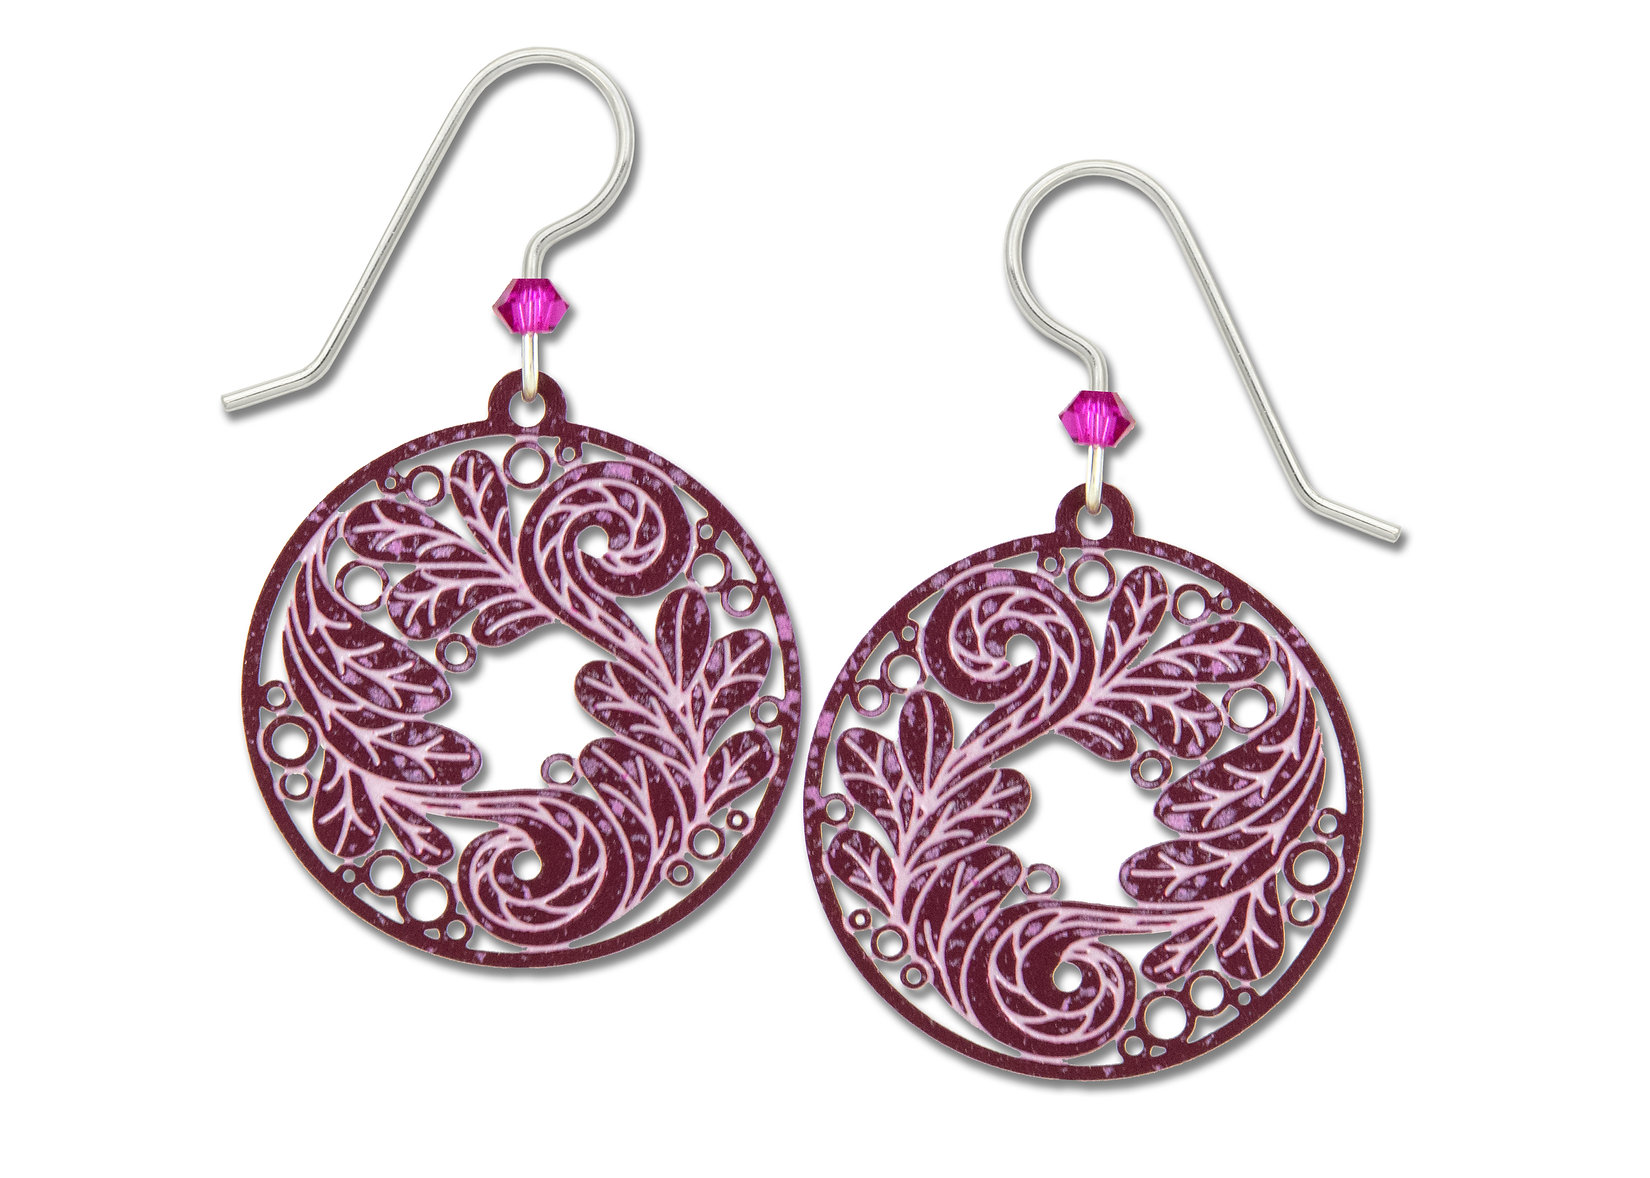 Magenta earrings with sterling silver ear-wires